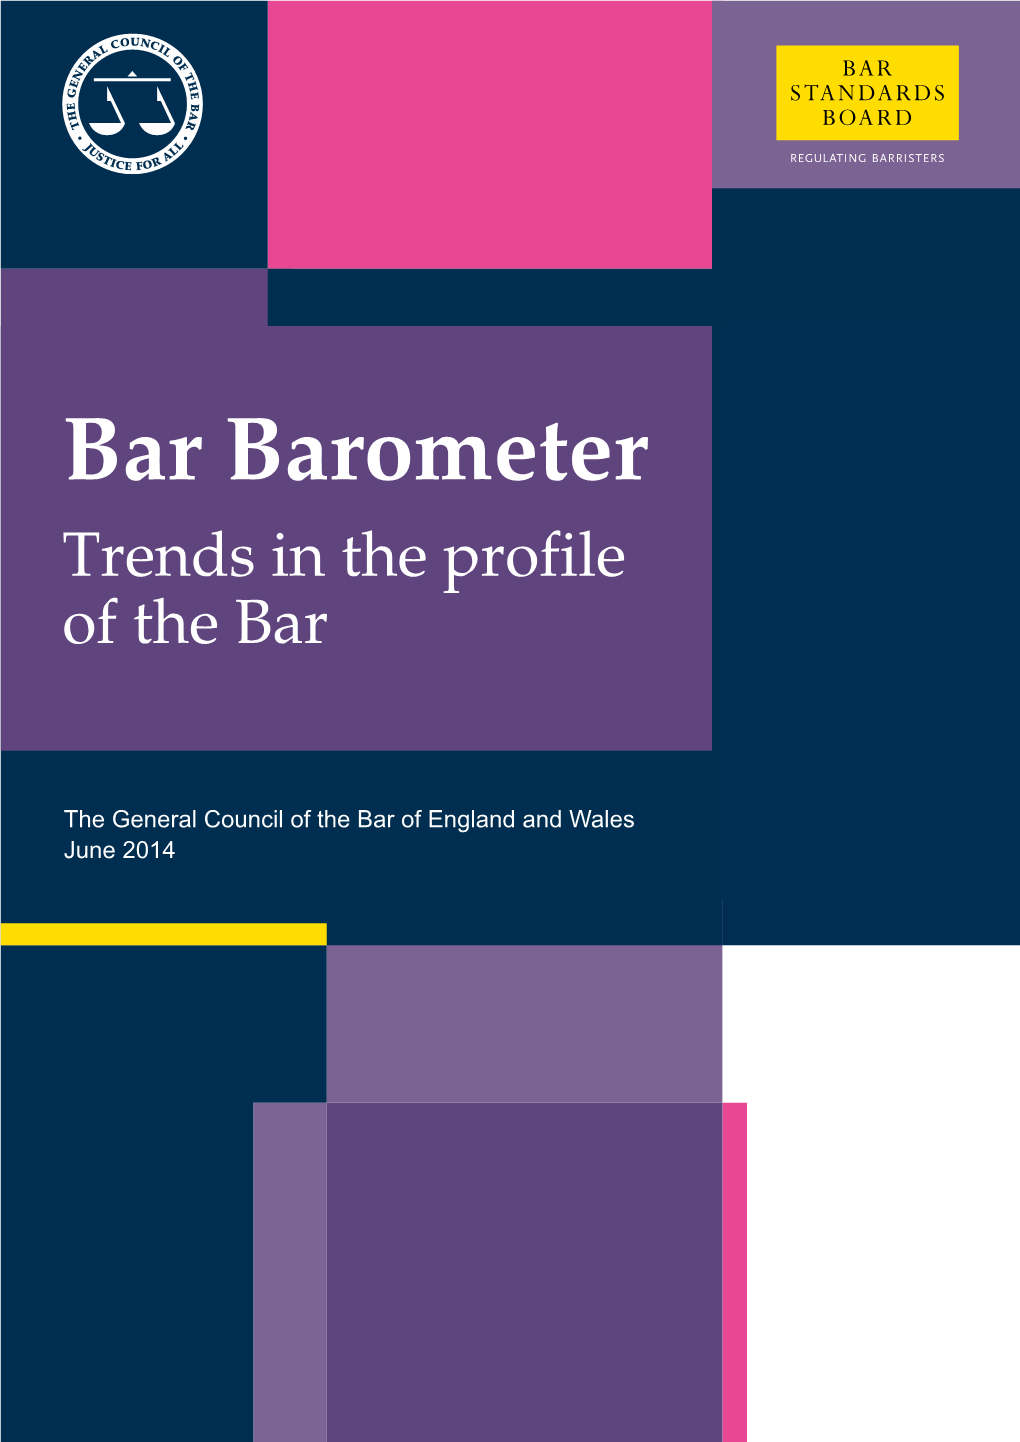 Bar Barometer Trends in the Profile of the Bar